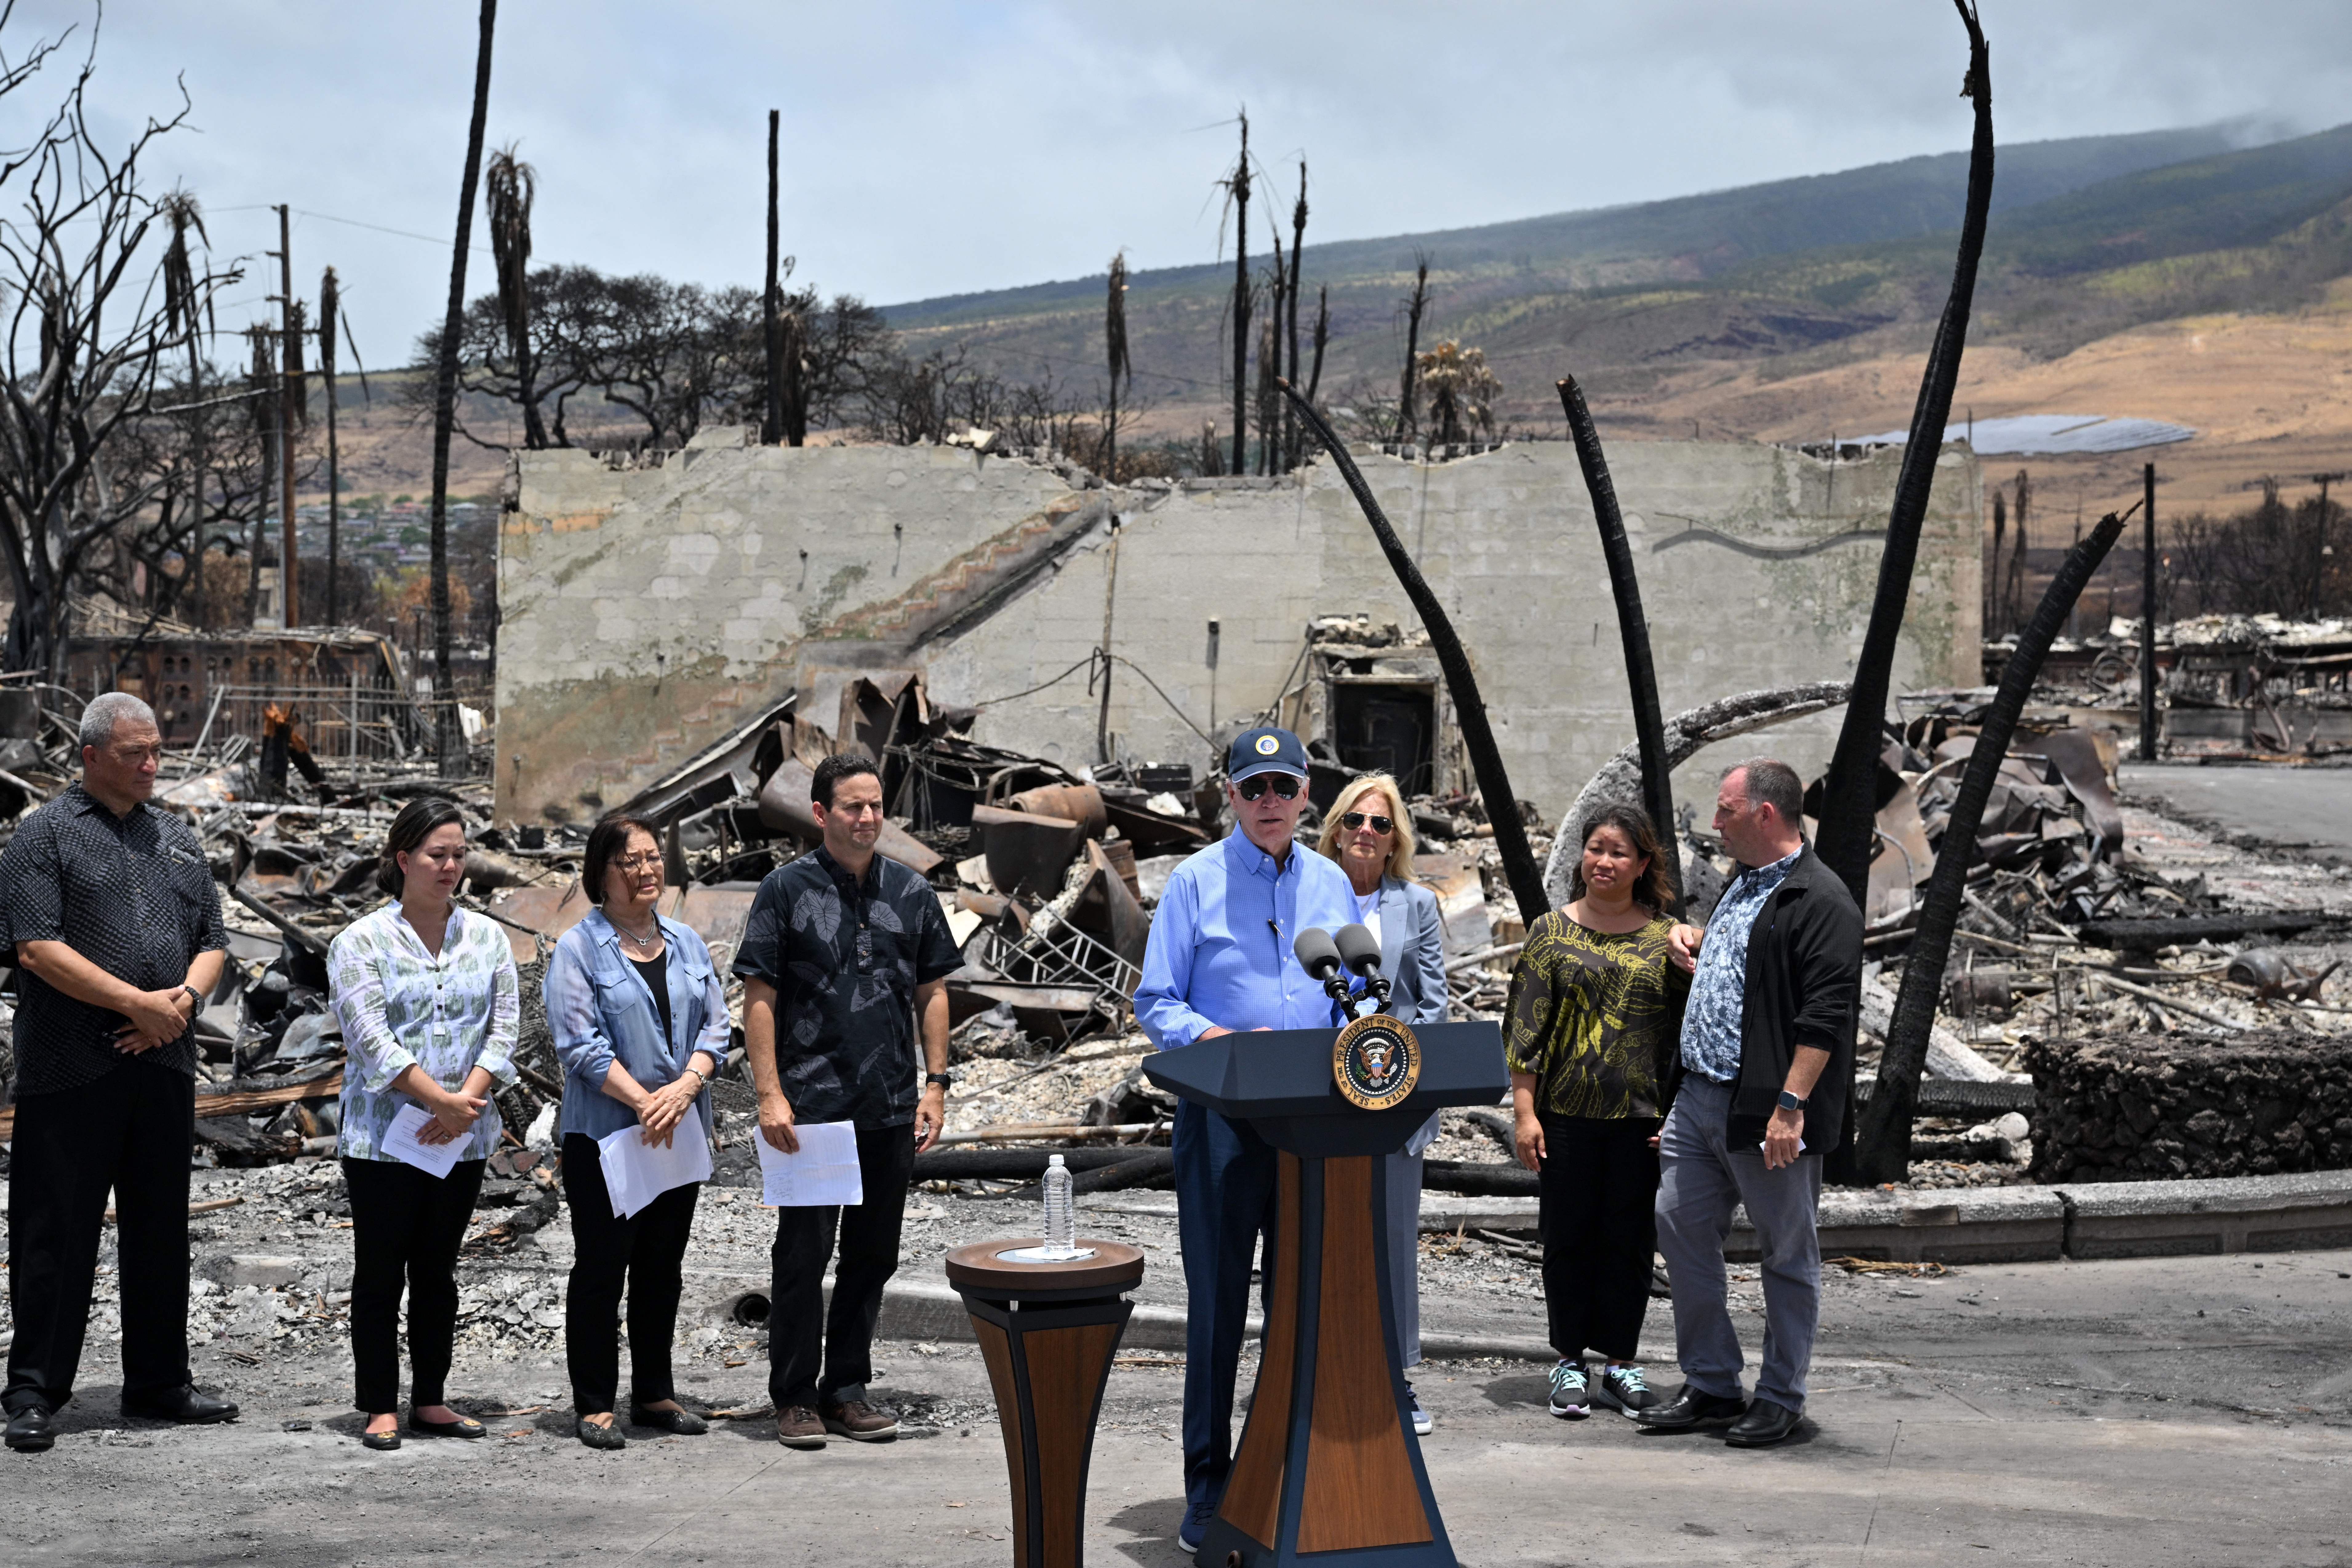 Joe Biden visits an area devastated by wildfires in Lahaina